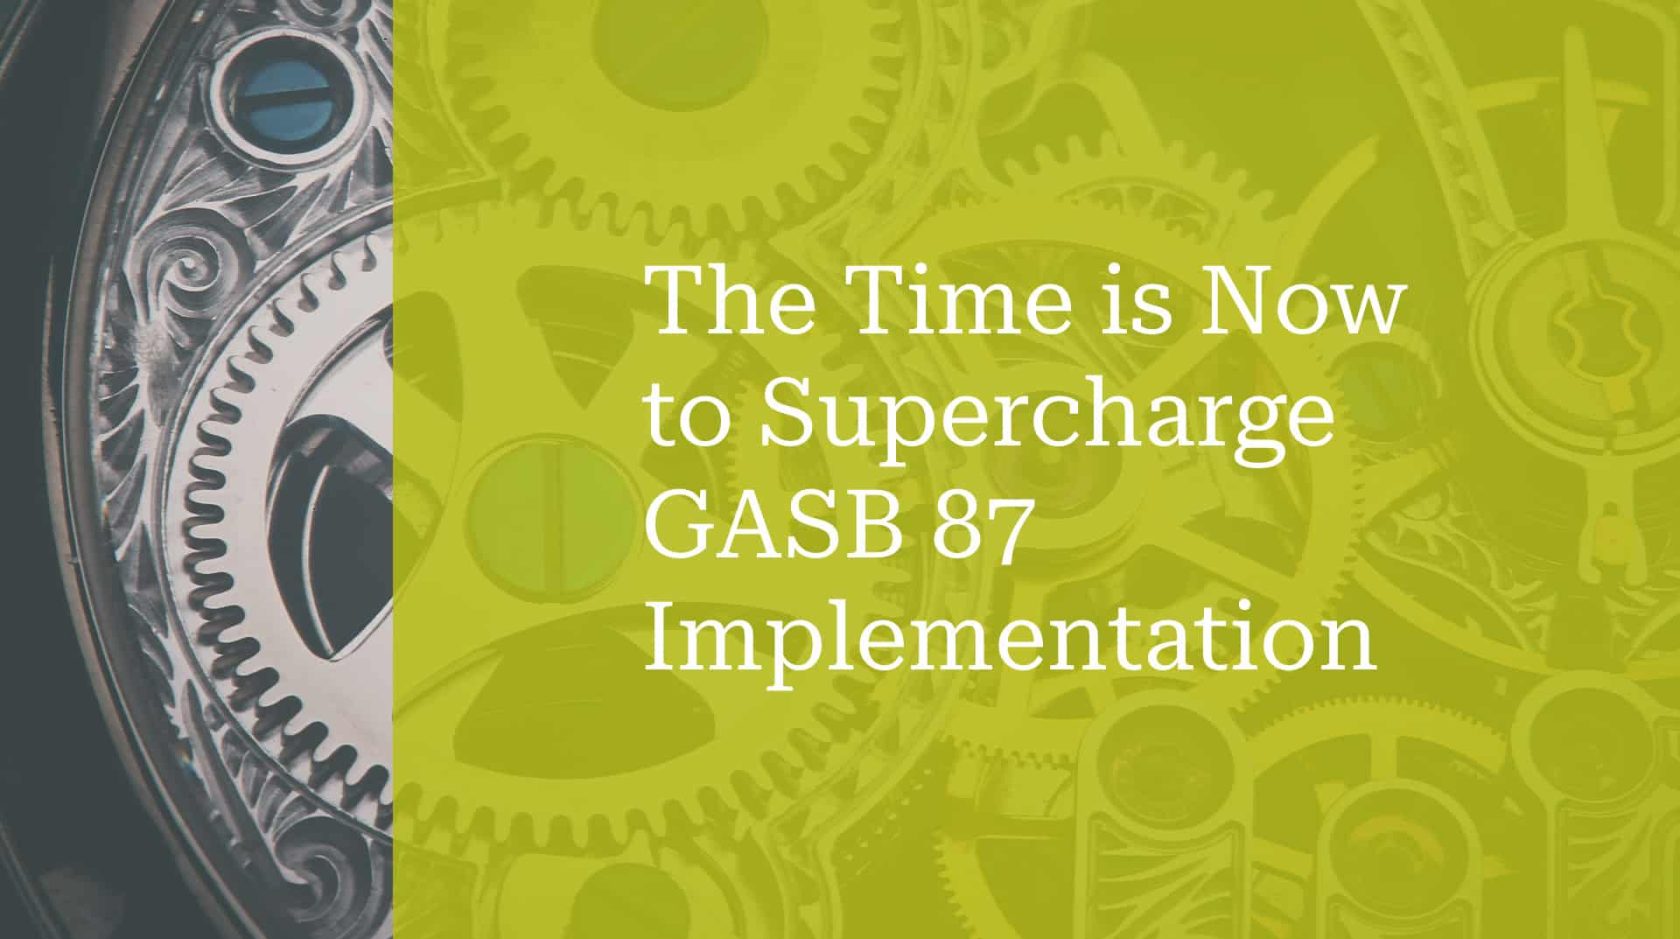 The Time is Now to Supercharge GASB 87 Implementation.